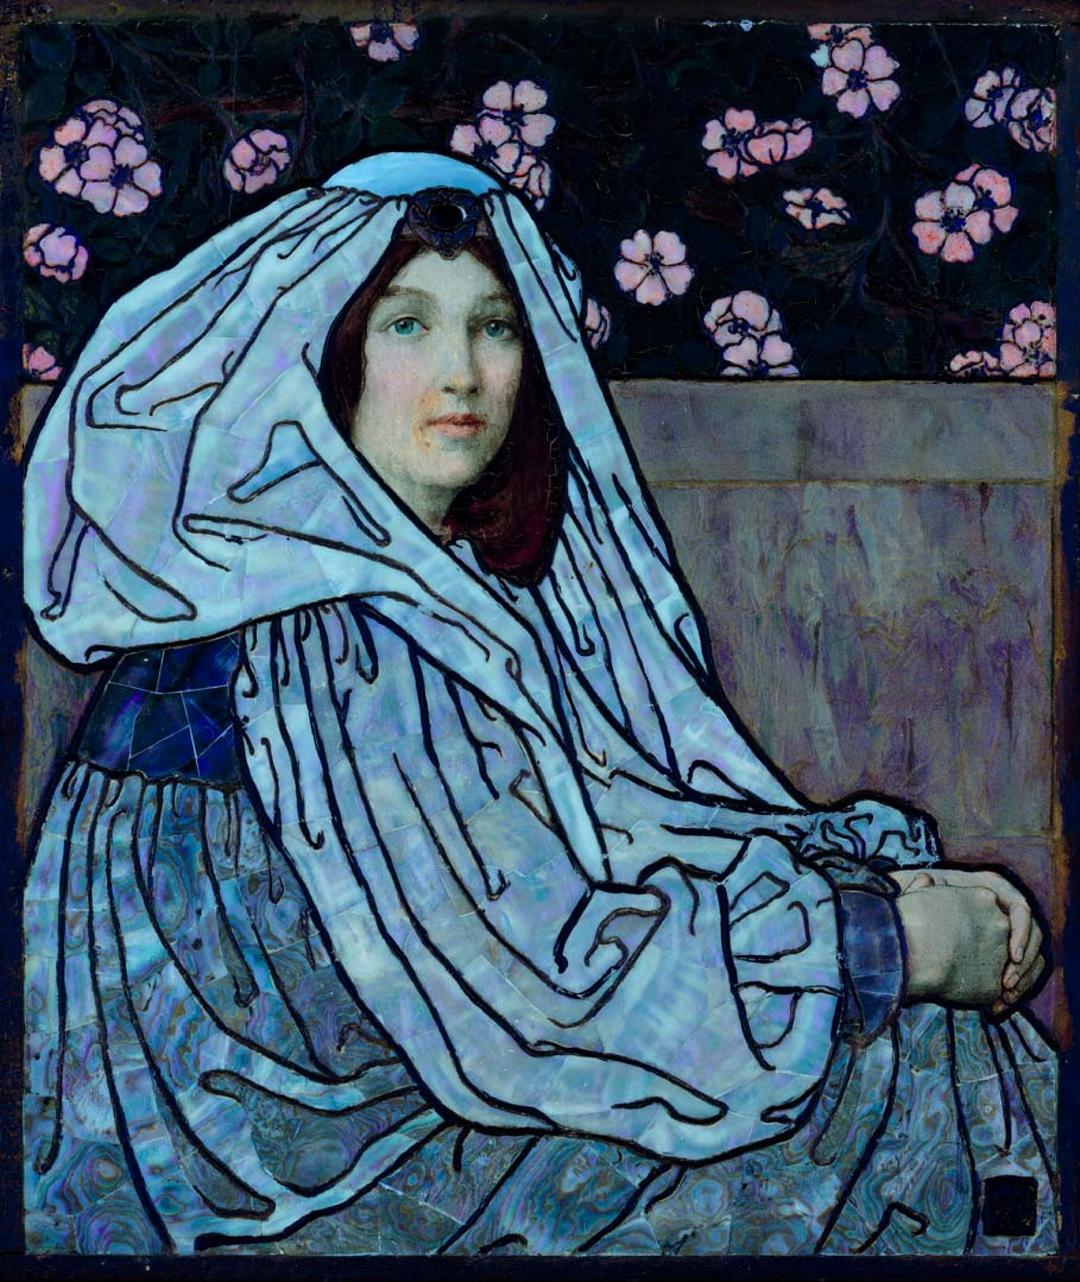 A painted portrait of an auburn-haired young woman, shrouded in garments made from mother of pearl and semi-precious stones, photographed under UV light.